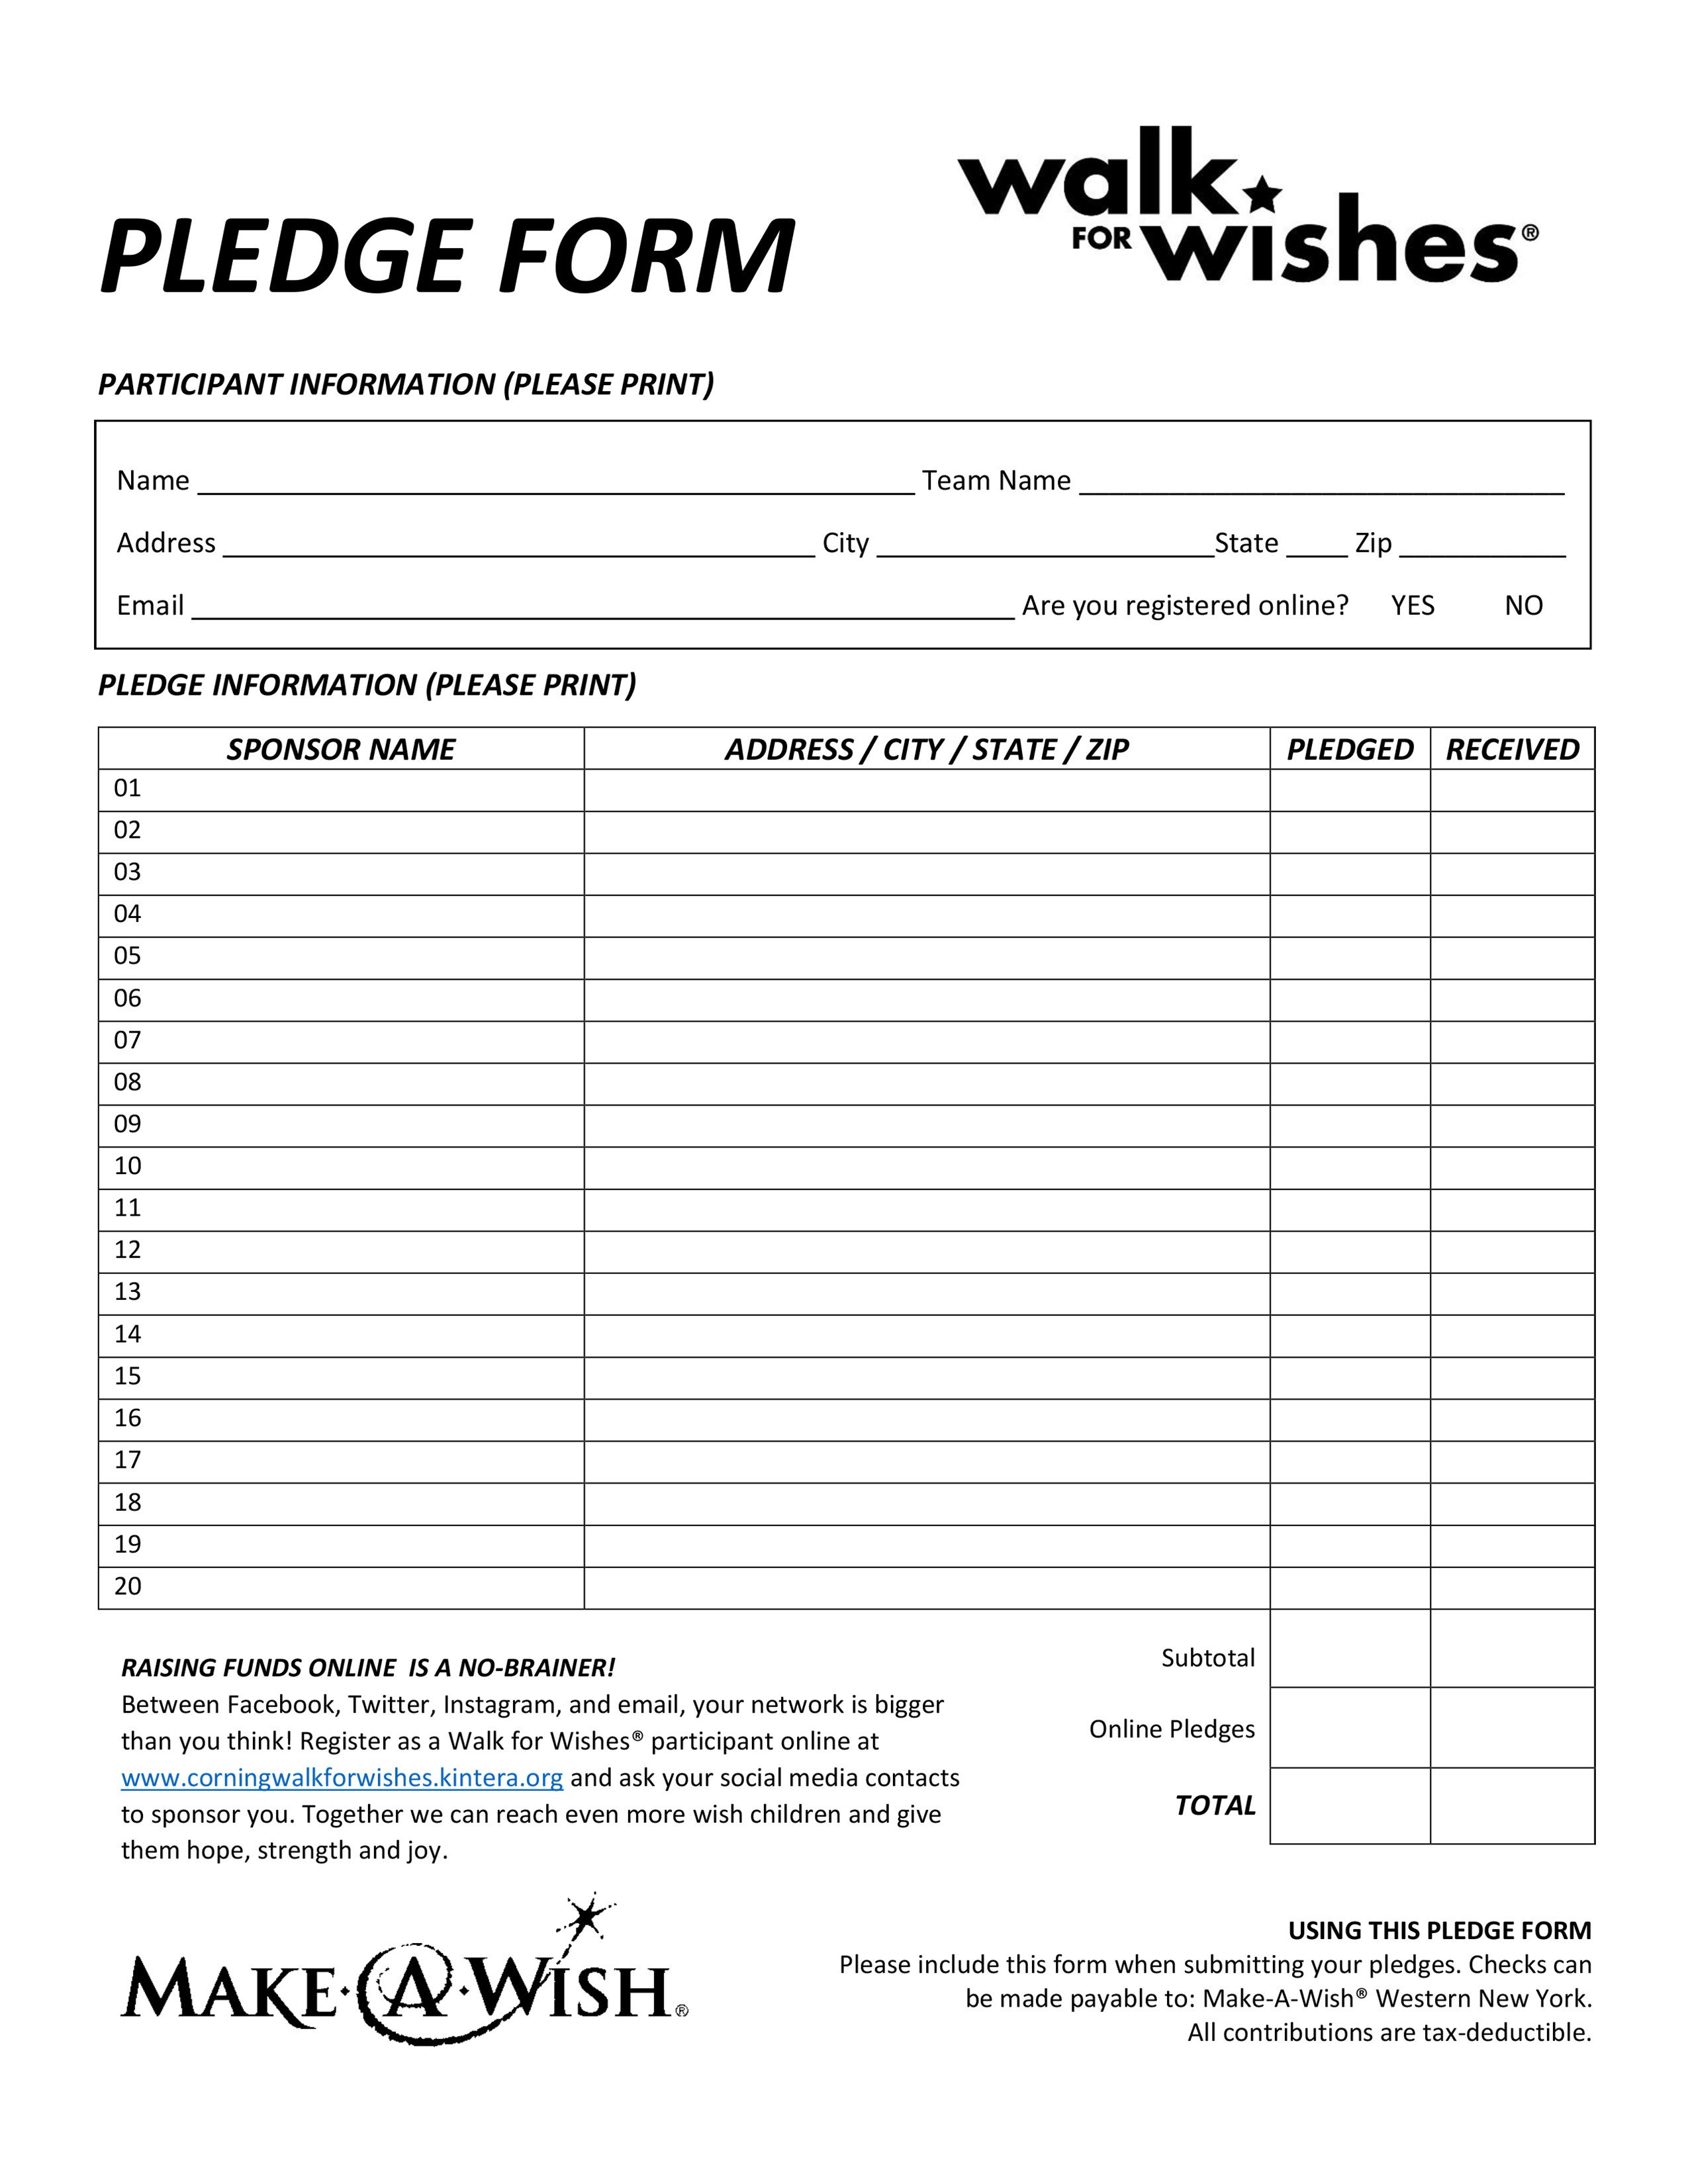 Walk for Wishes Pledge Form